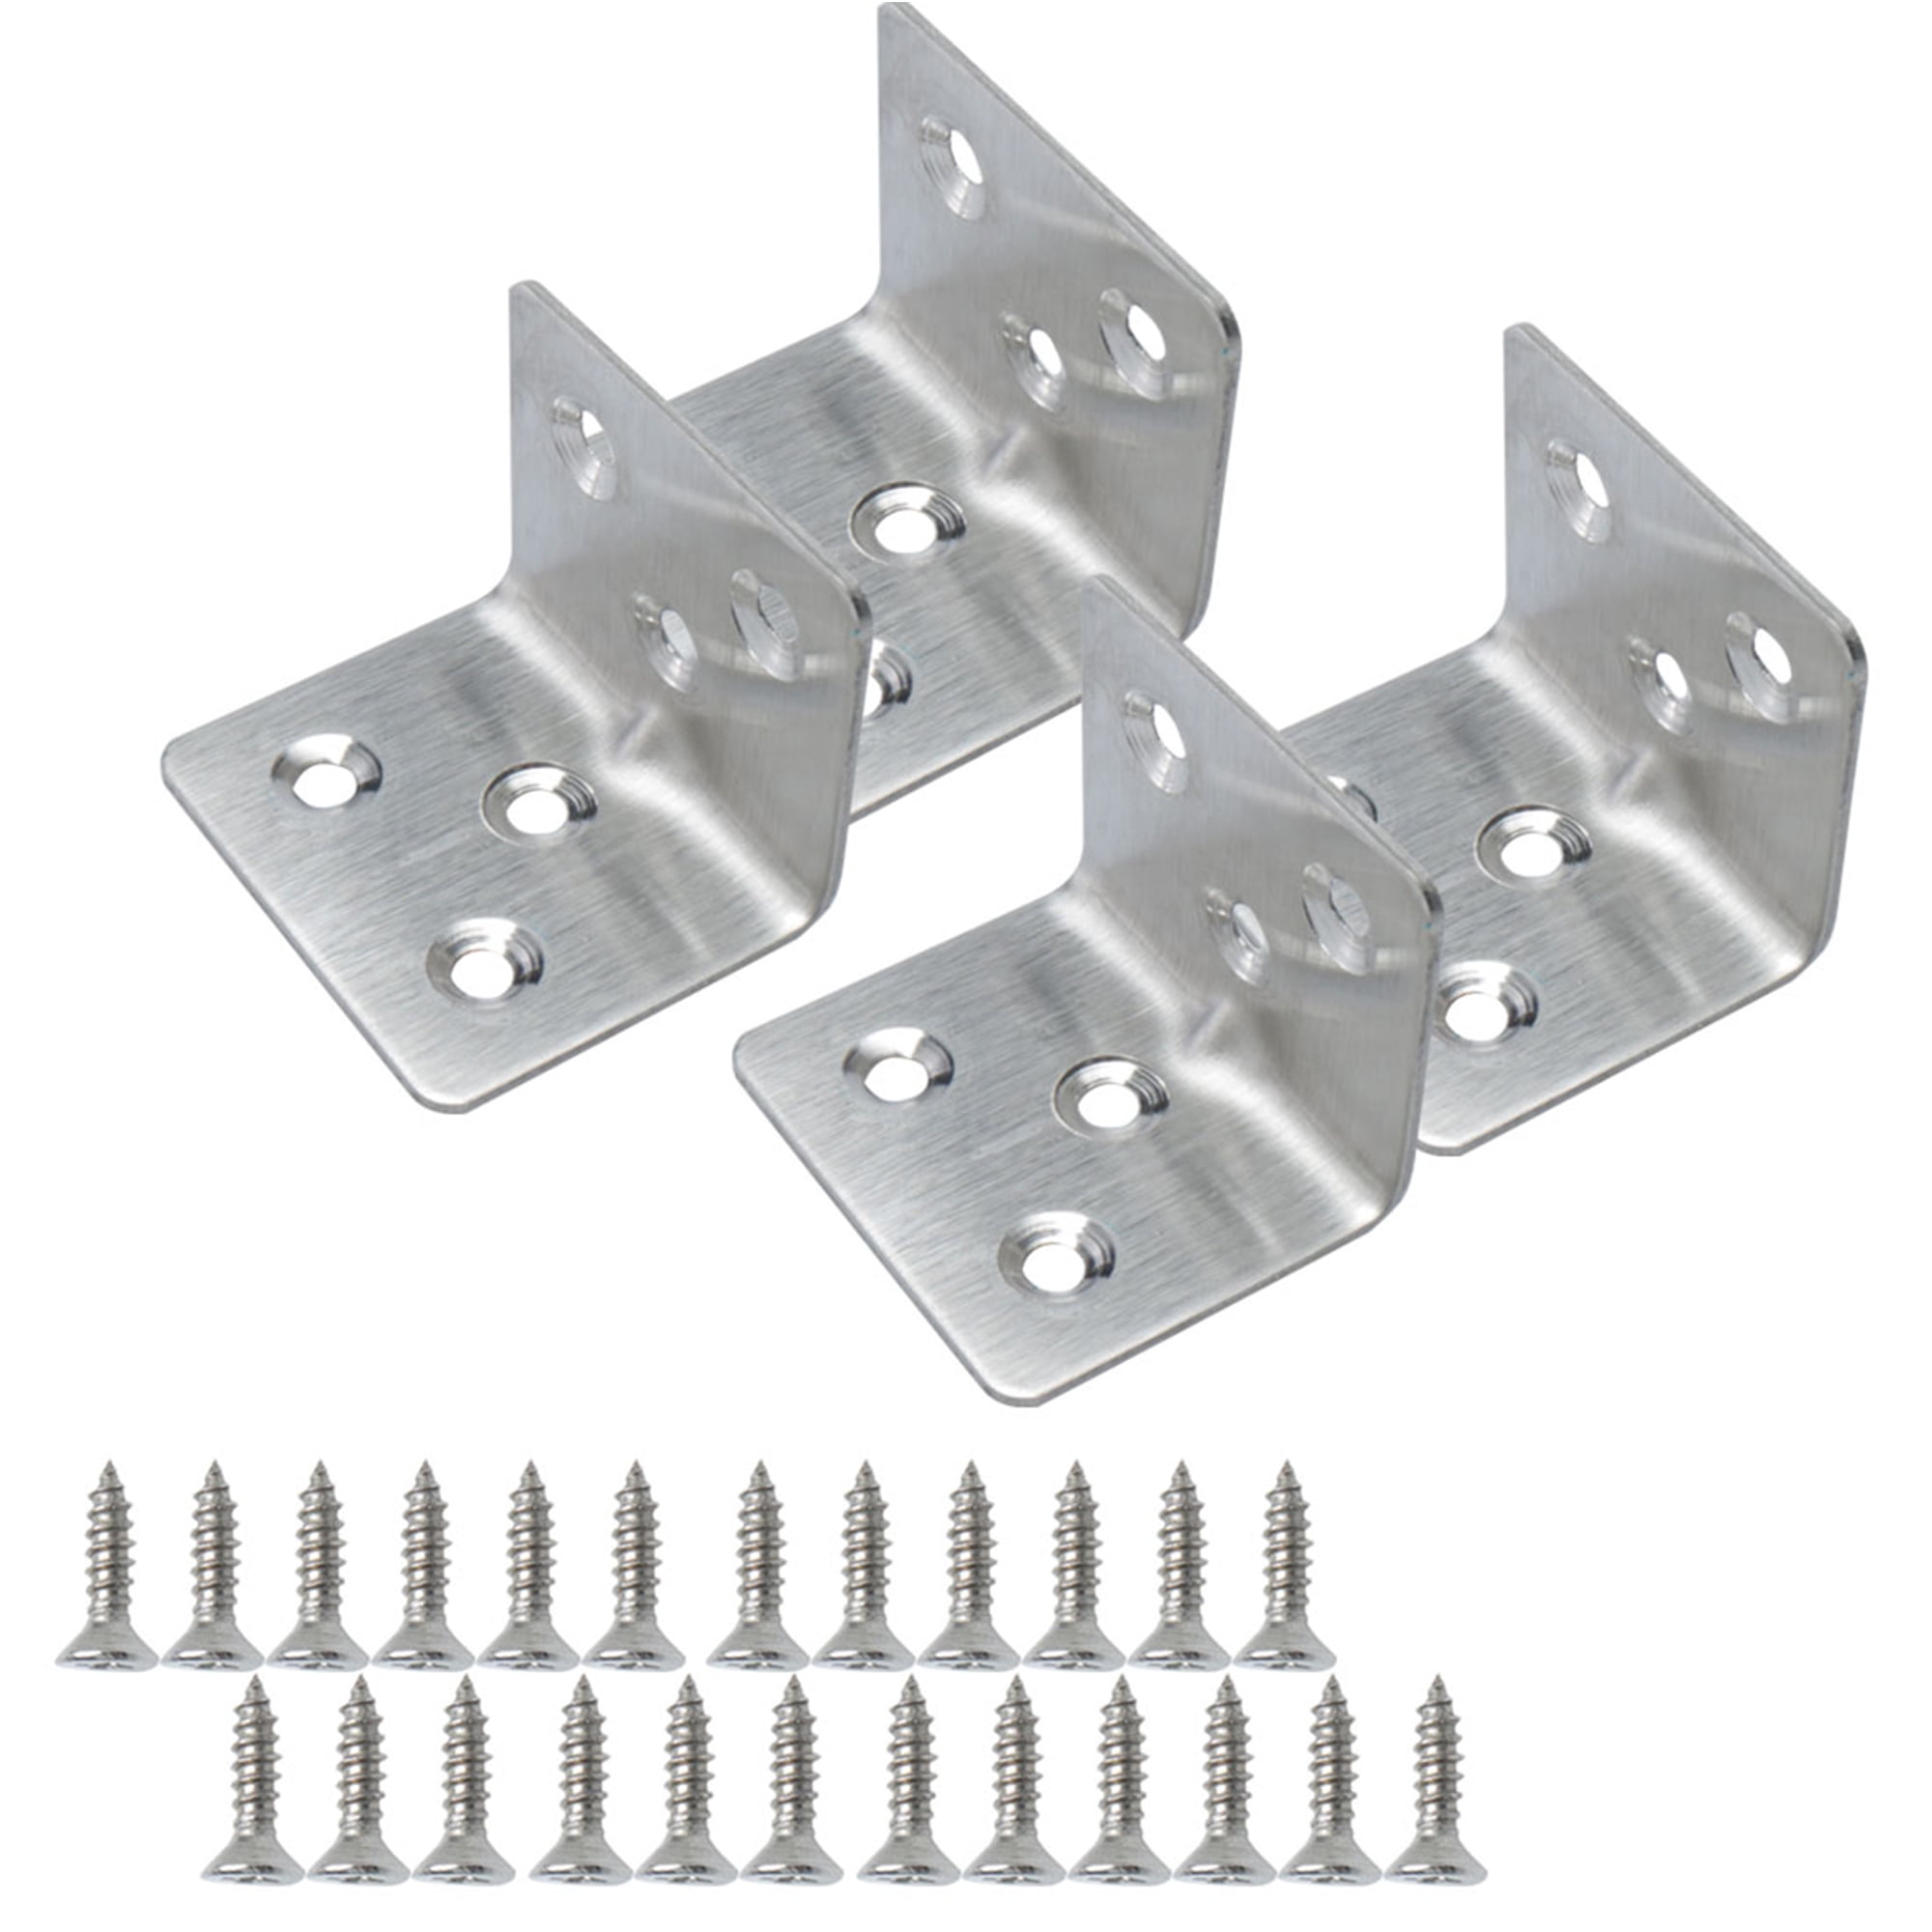 Silver Stainless Steel L Shape Right Angle Brackets 5mm Hole Dia Pack of 10 